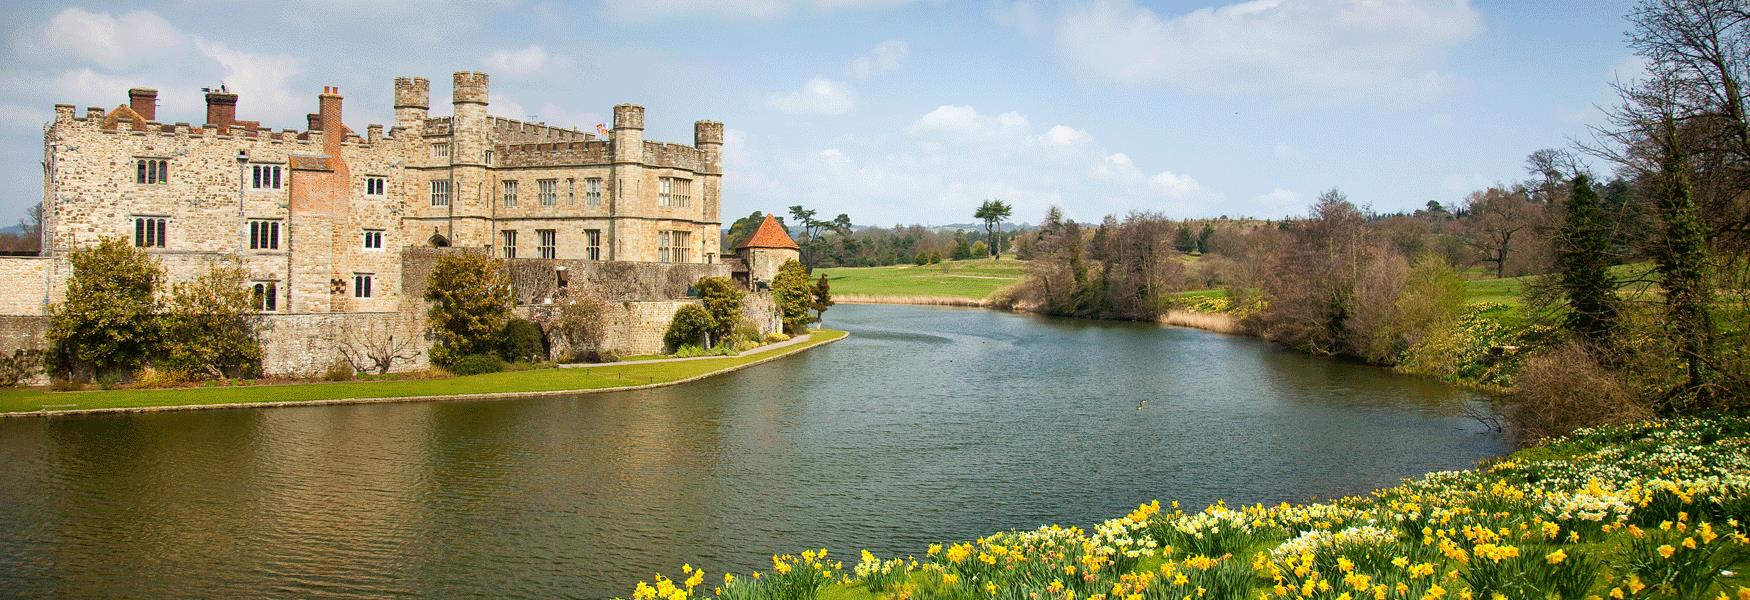 Spring at Leeds Castle, Host of golden daffodils, Maidstone